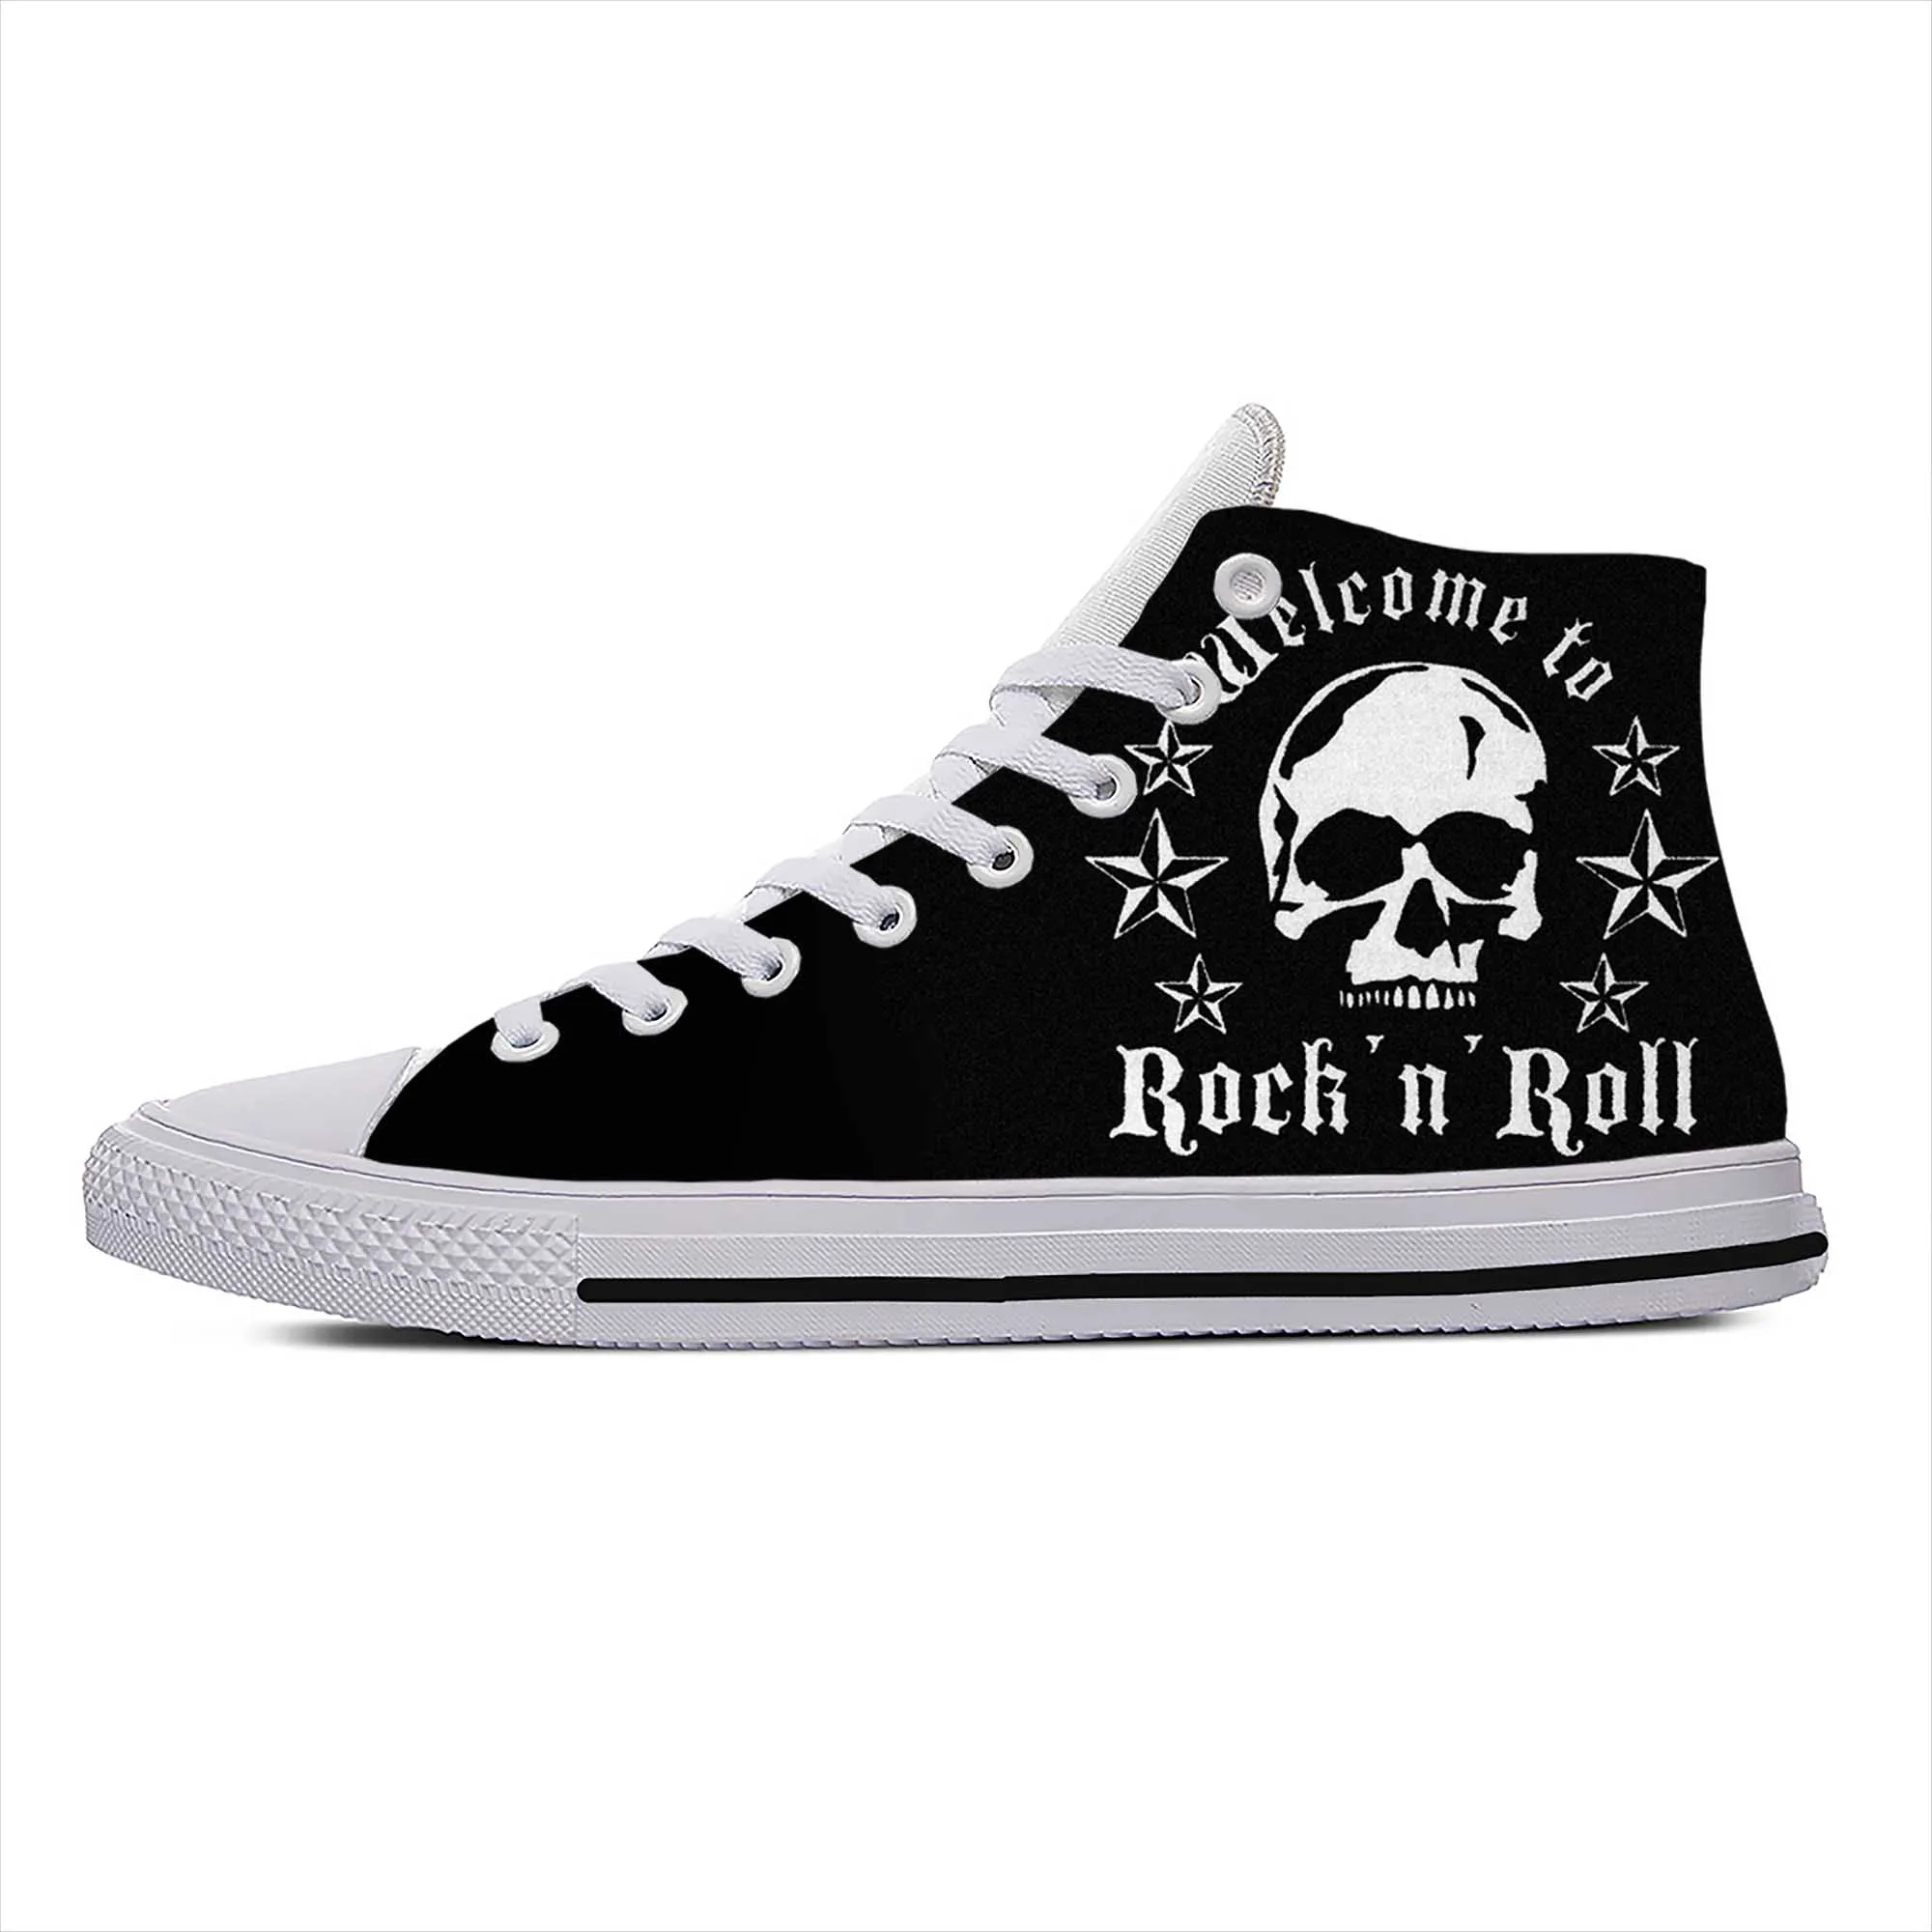 Rock N And Roll Band Music Singer Fashion Funny Casual Cloth Shoes High Top Comfortable Breathable 3D Print Men Women Sneakers